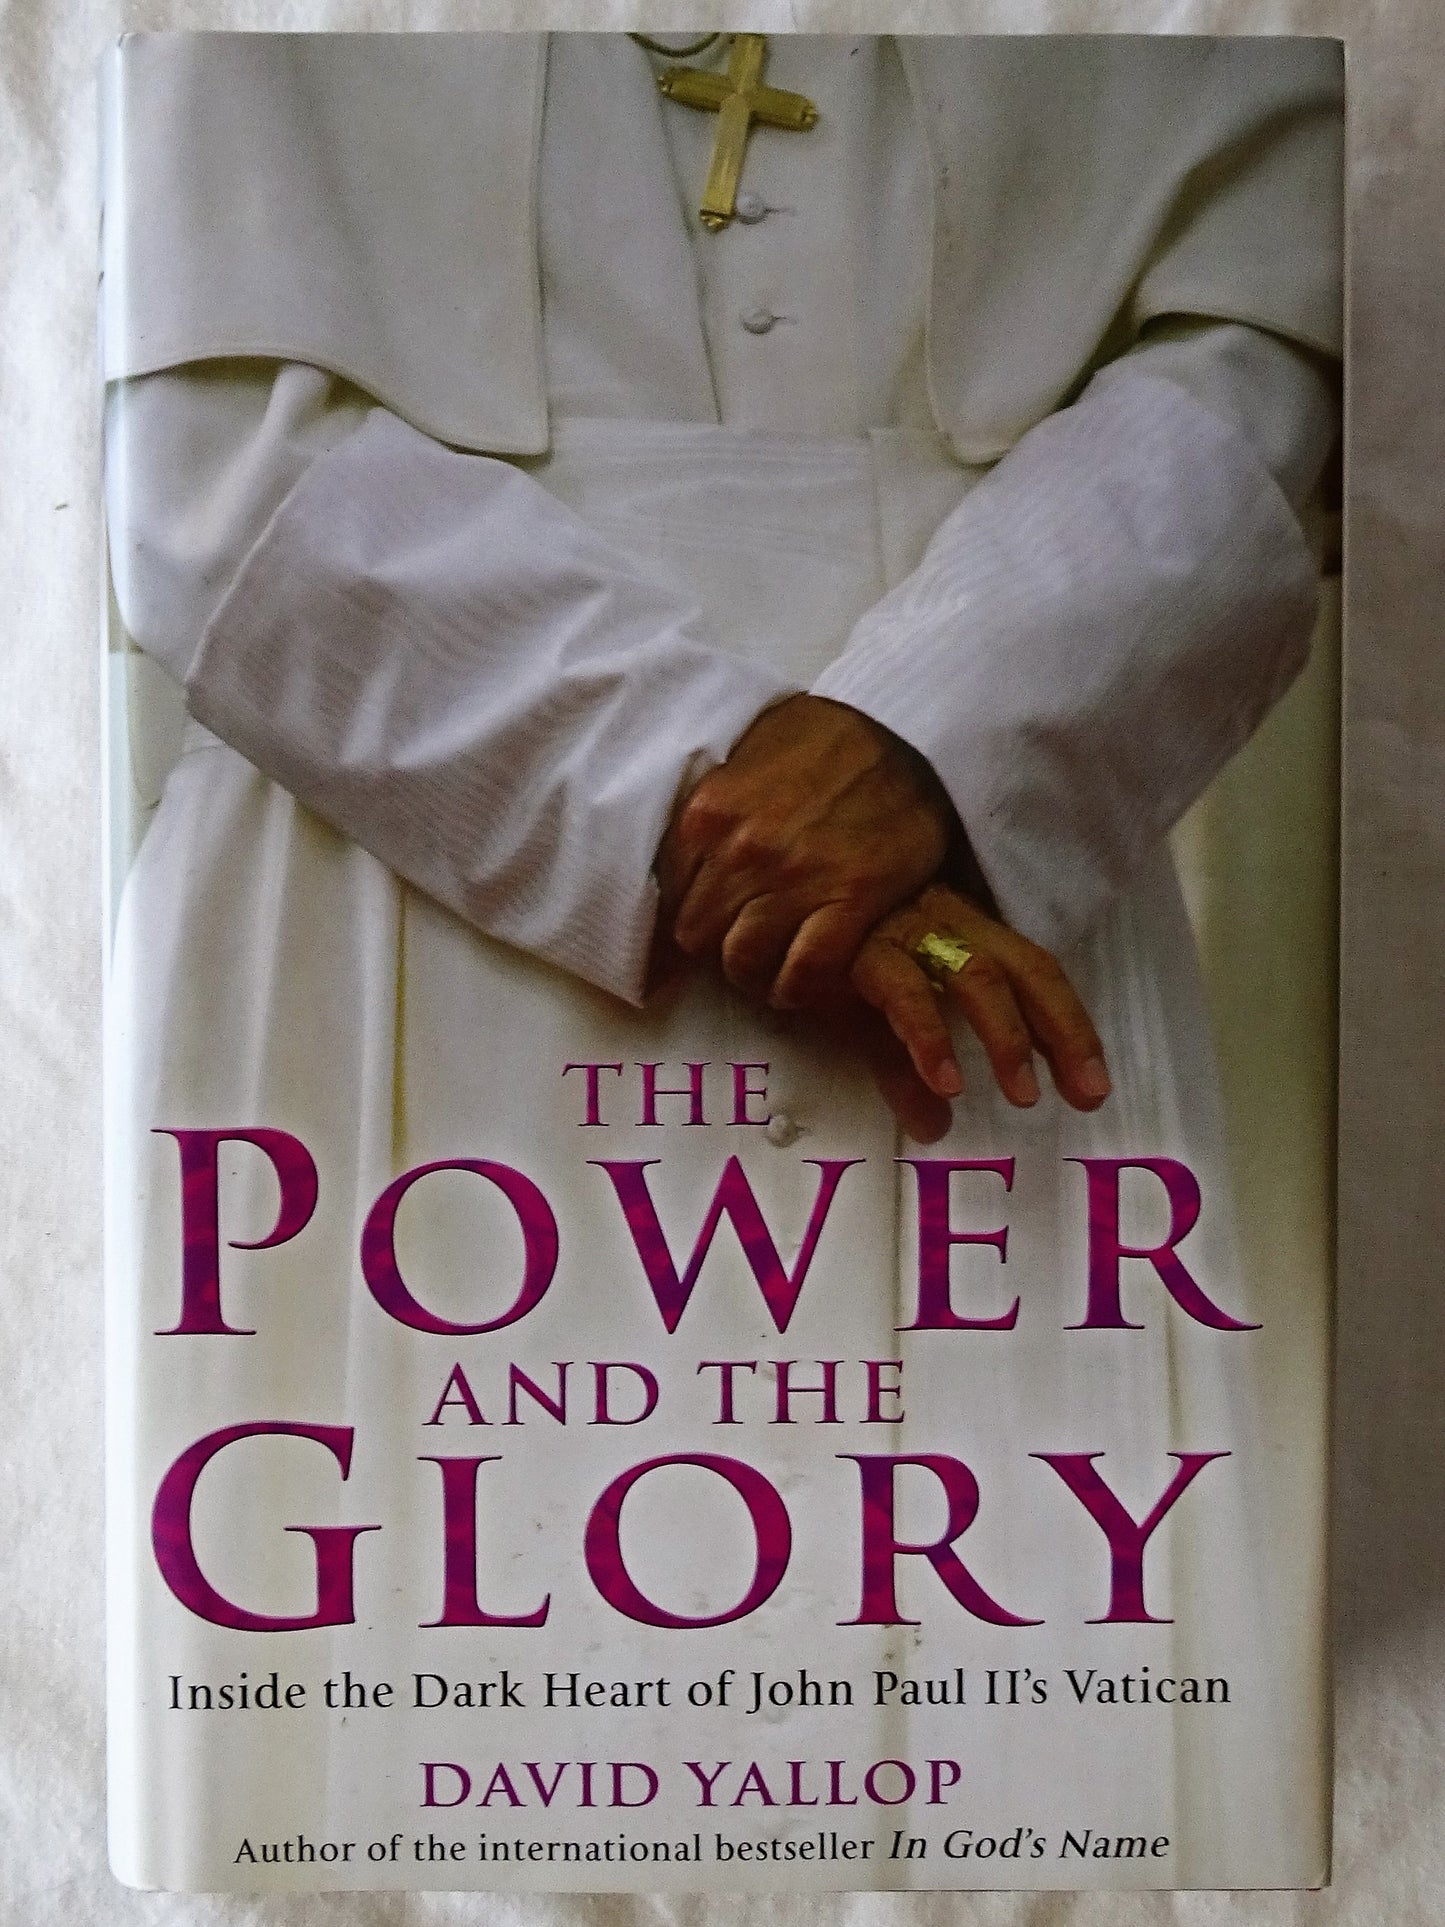 The Power and the Glory by David Yallop